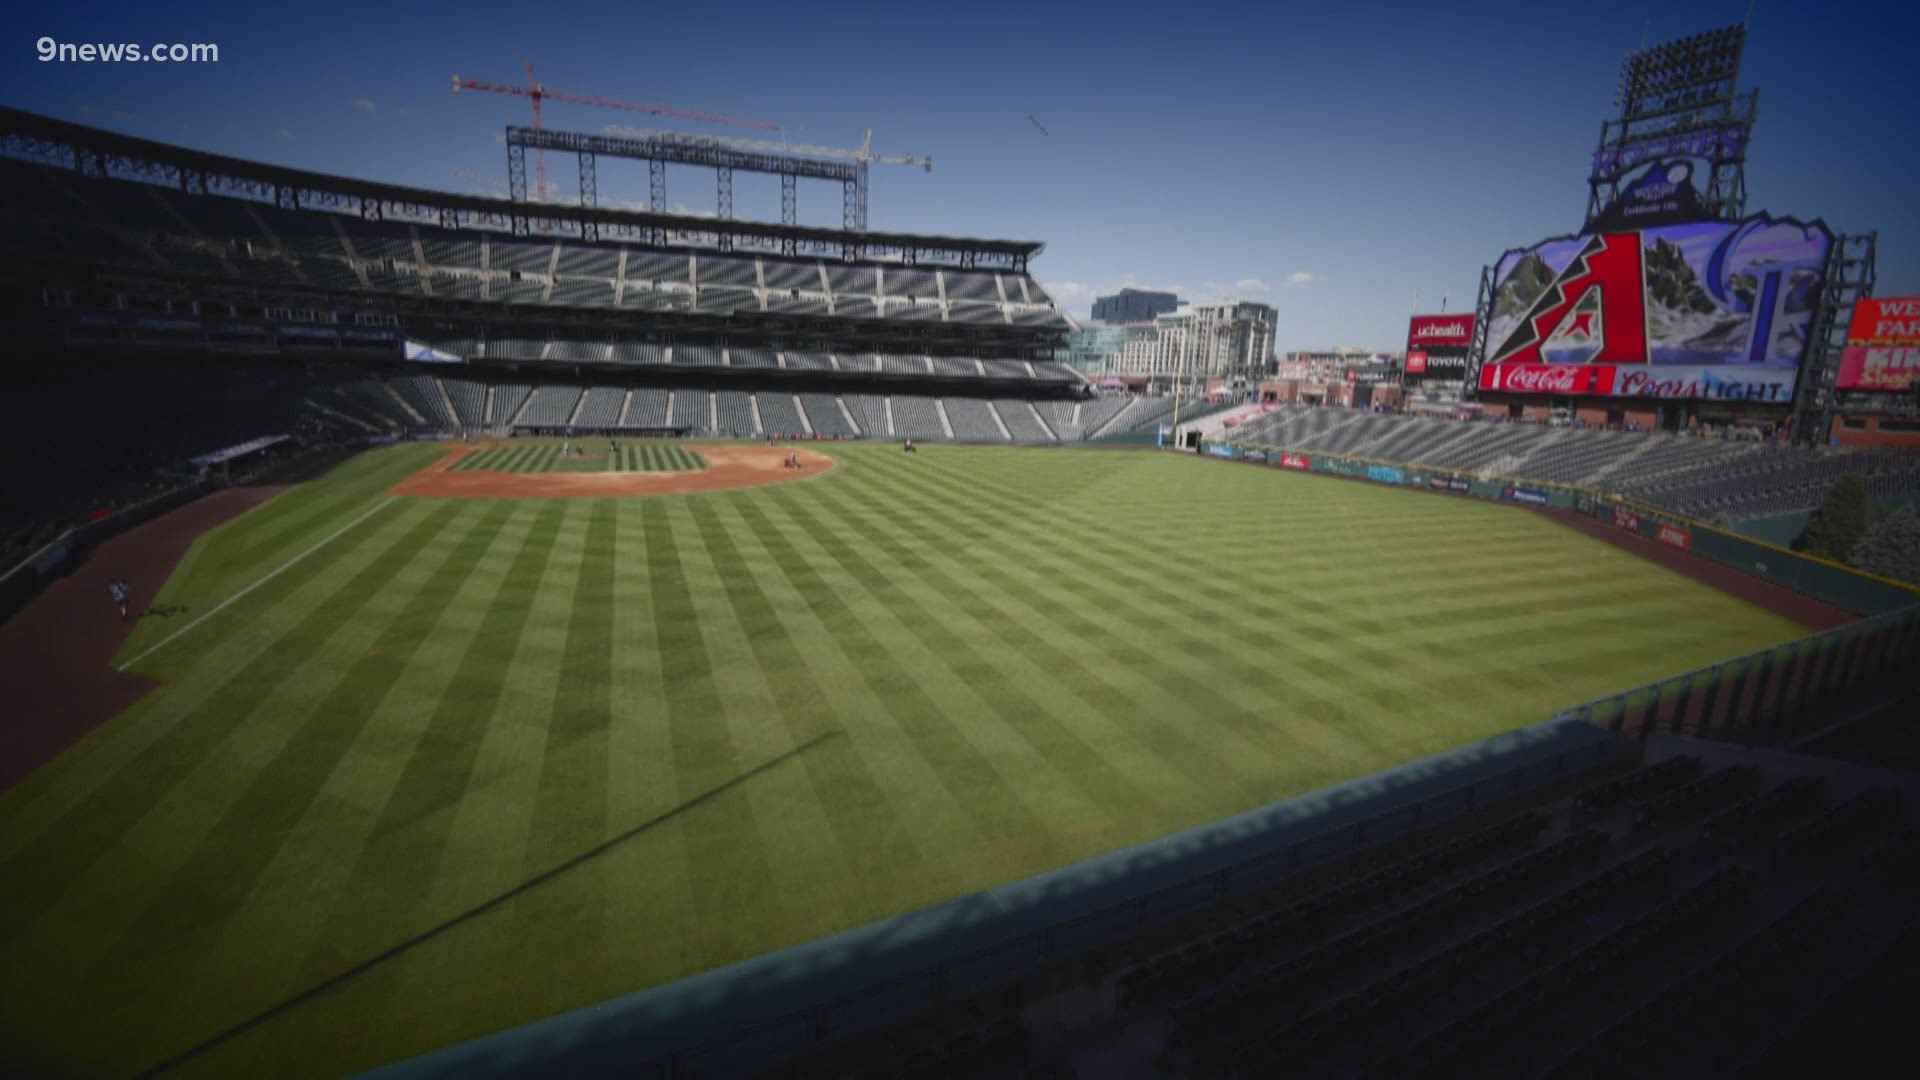 The Colorado Rockies said they will host 12,500 fans beginning on Opening Day, Thursday, April 1, which is equivalent to 25% of Coors Field’s capacity.